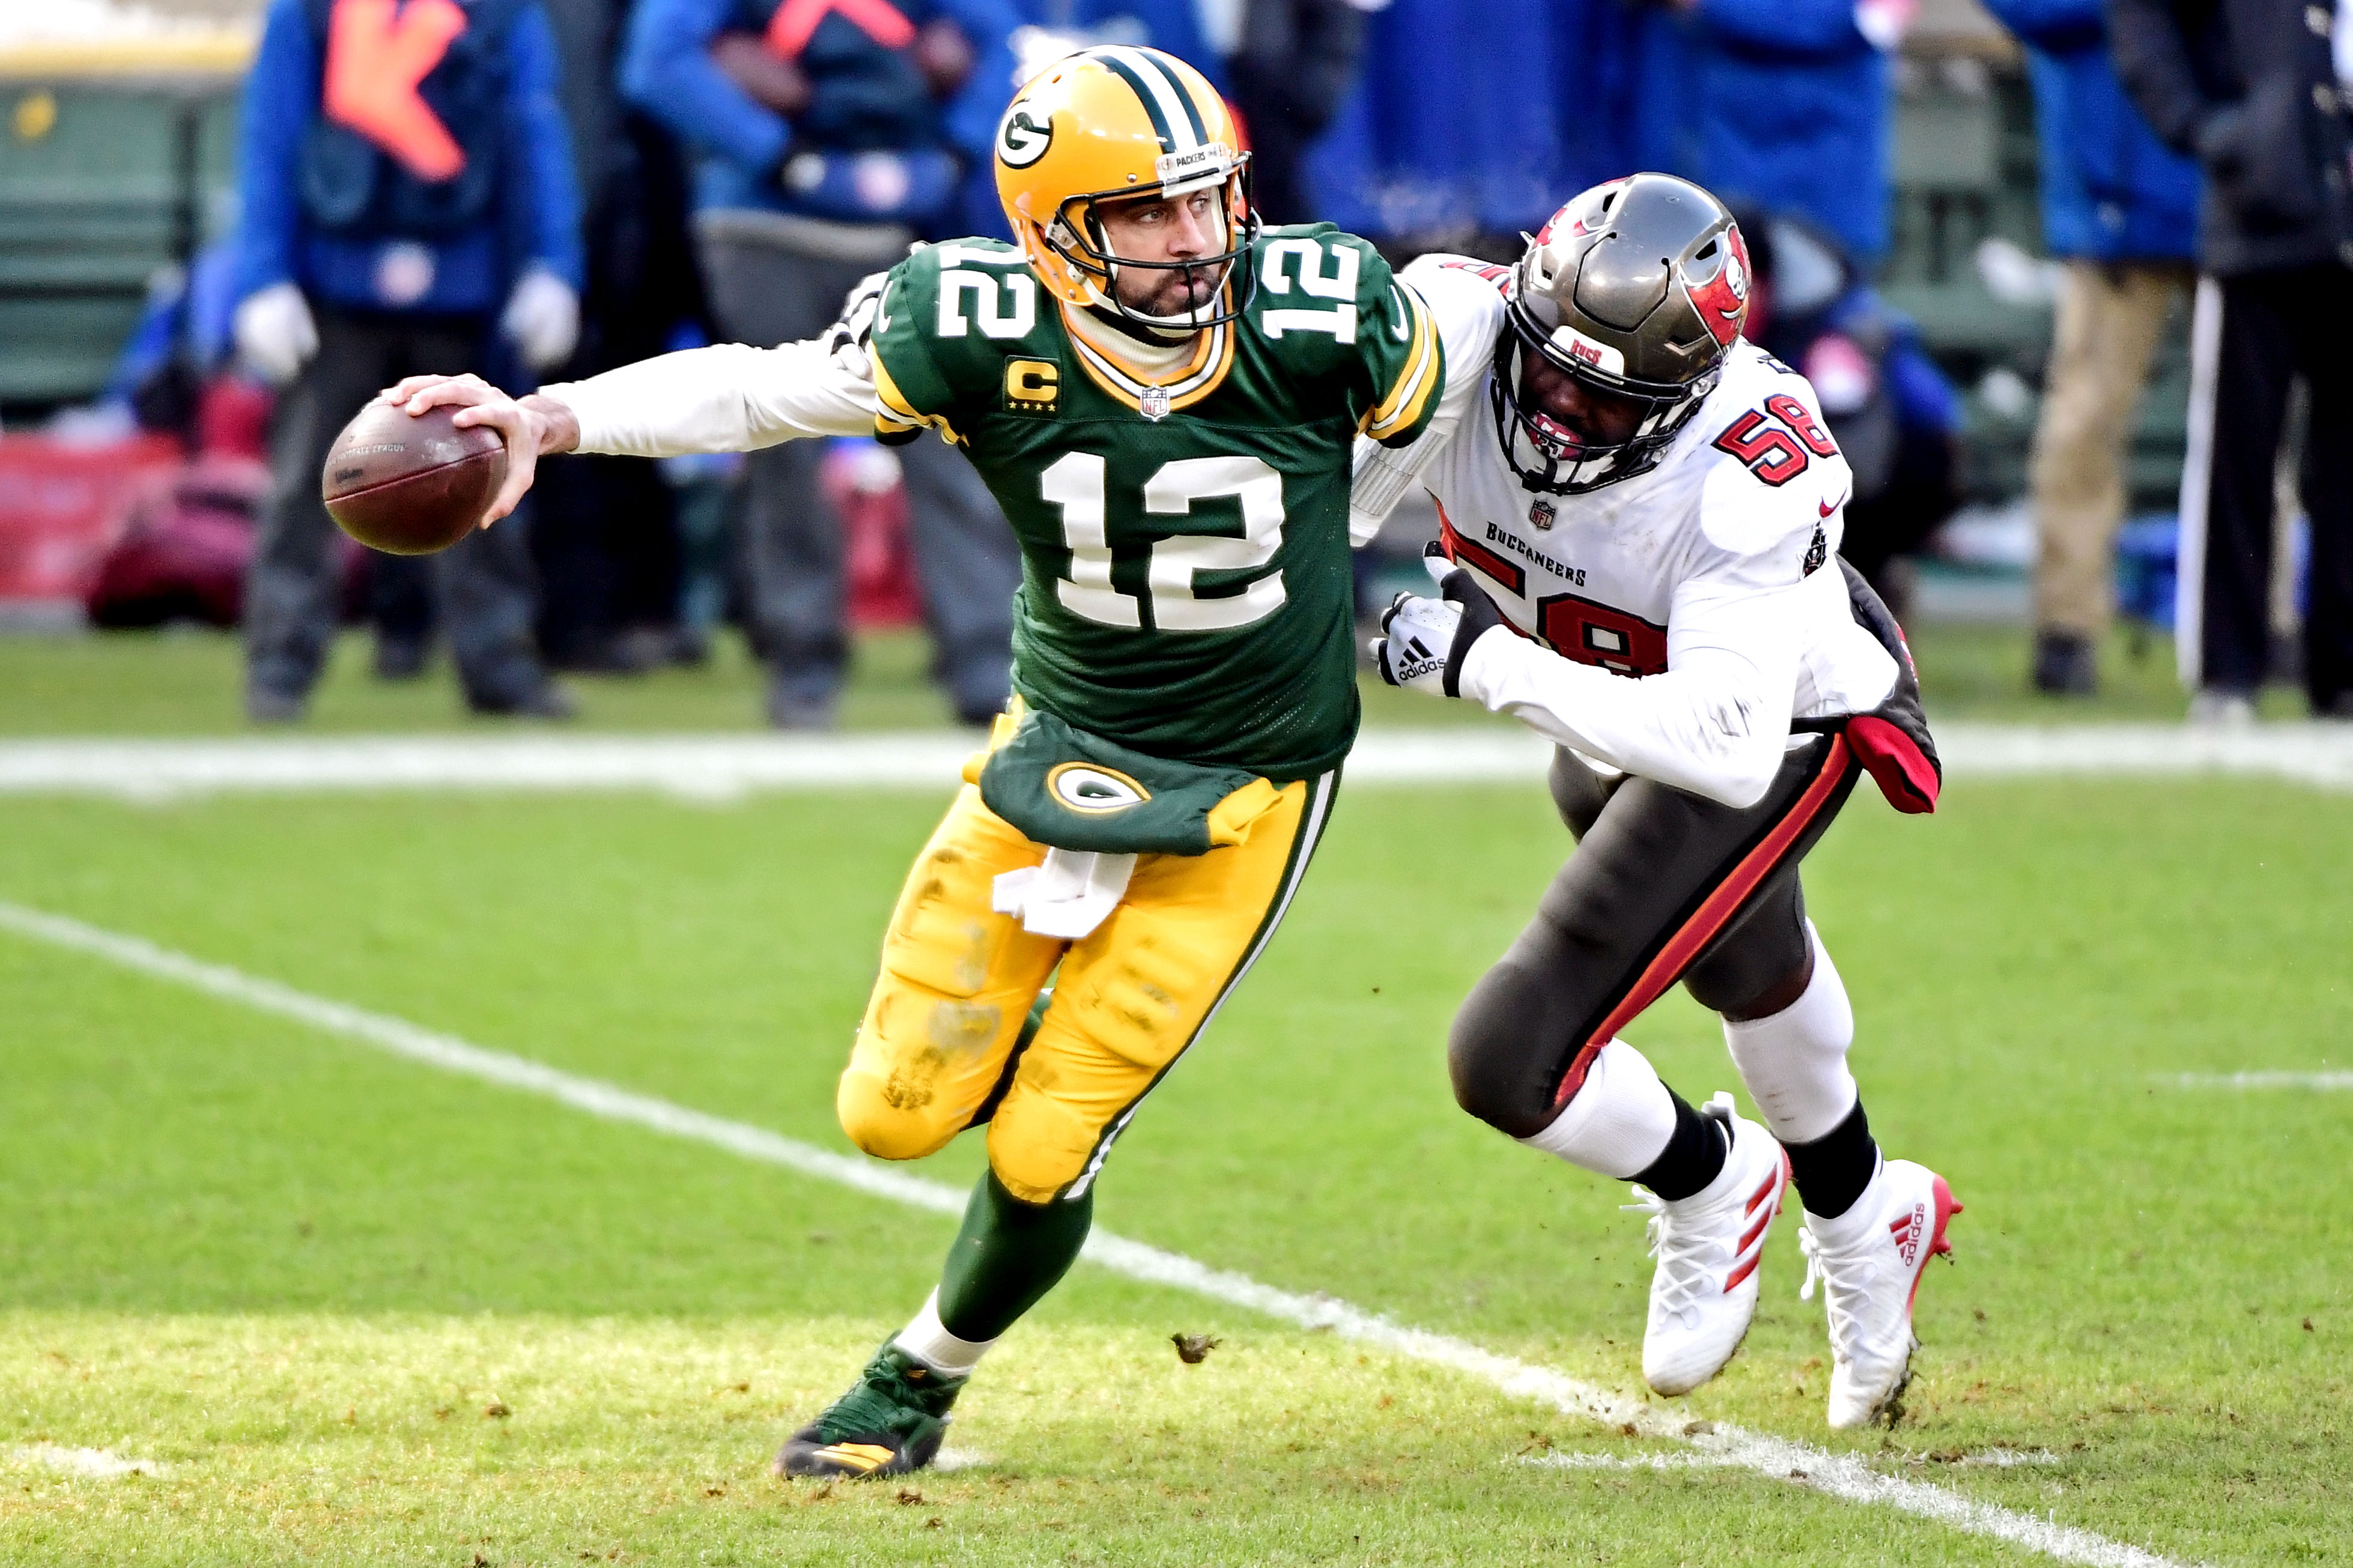 Tampa Bay Buccaneers outside linebacker Jason Pierre-Paul sacks Green Bay Packers quarterback Aaron Rodgers during the first quarter of their NFC Championship game.